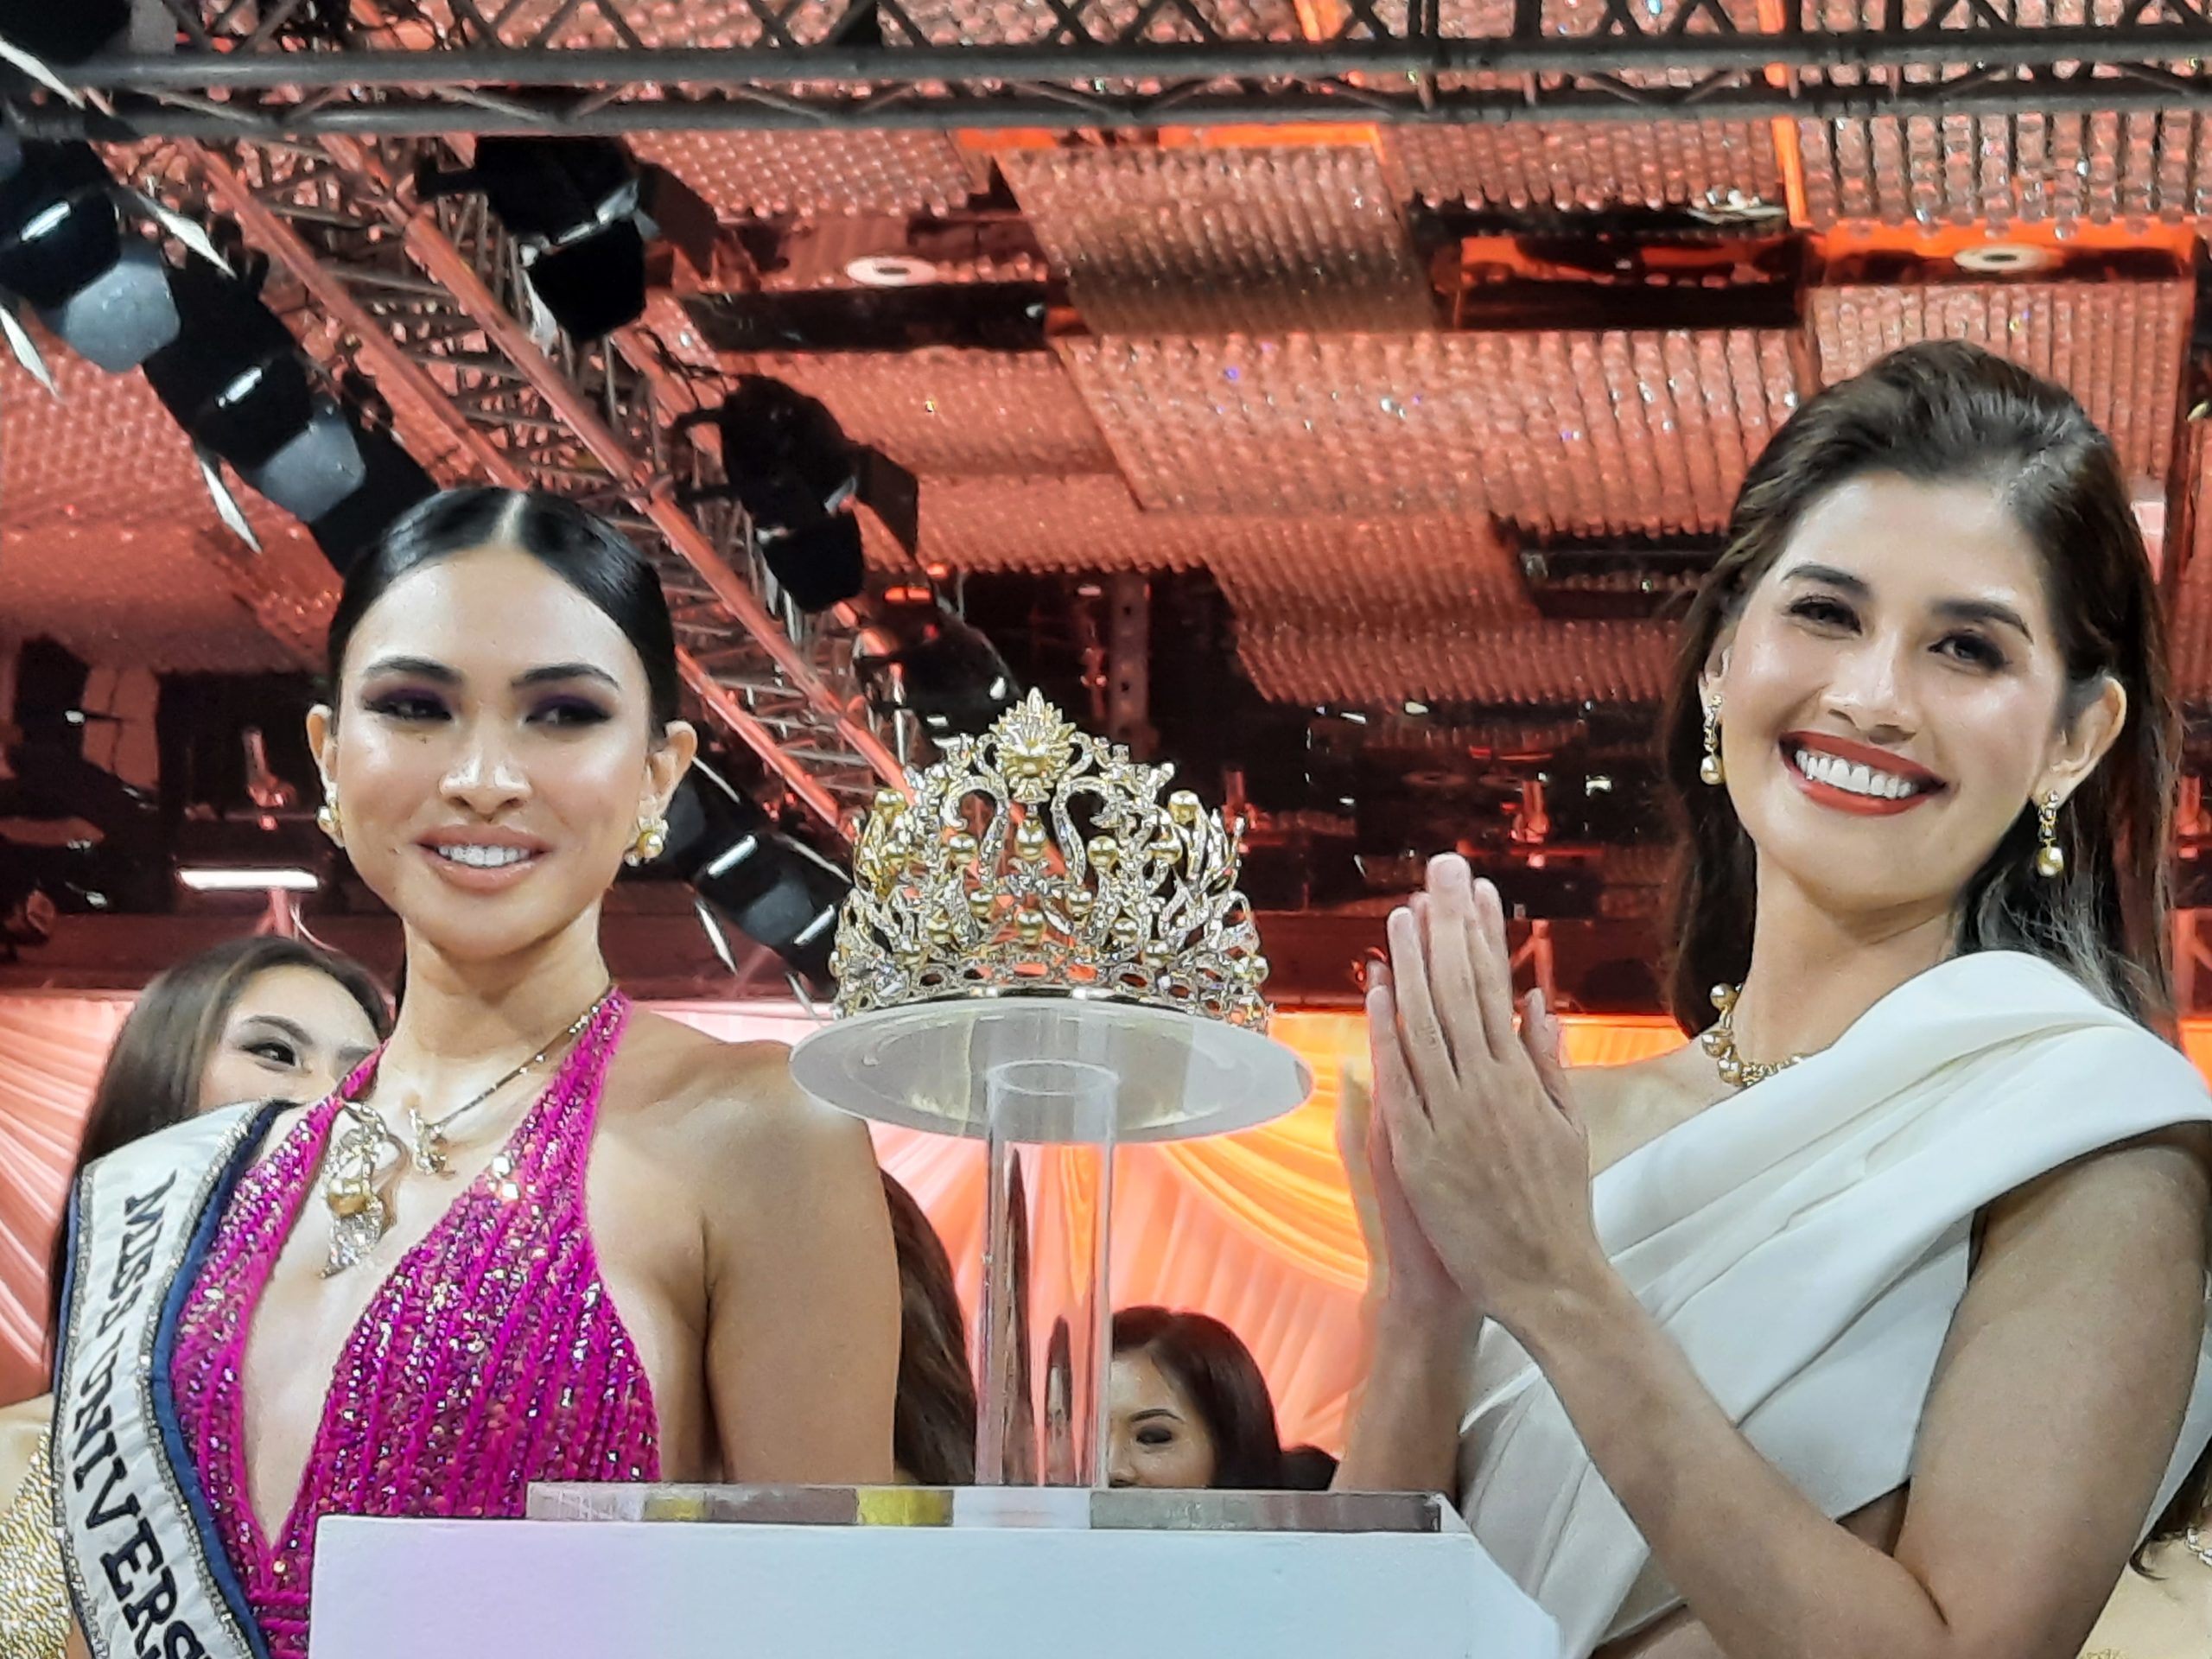 Miss Universe PH unveils new crown for 2022 pageant | Inquirer Lifestyle